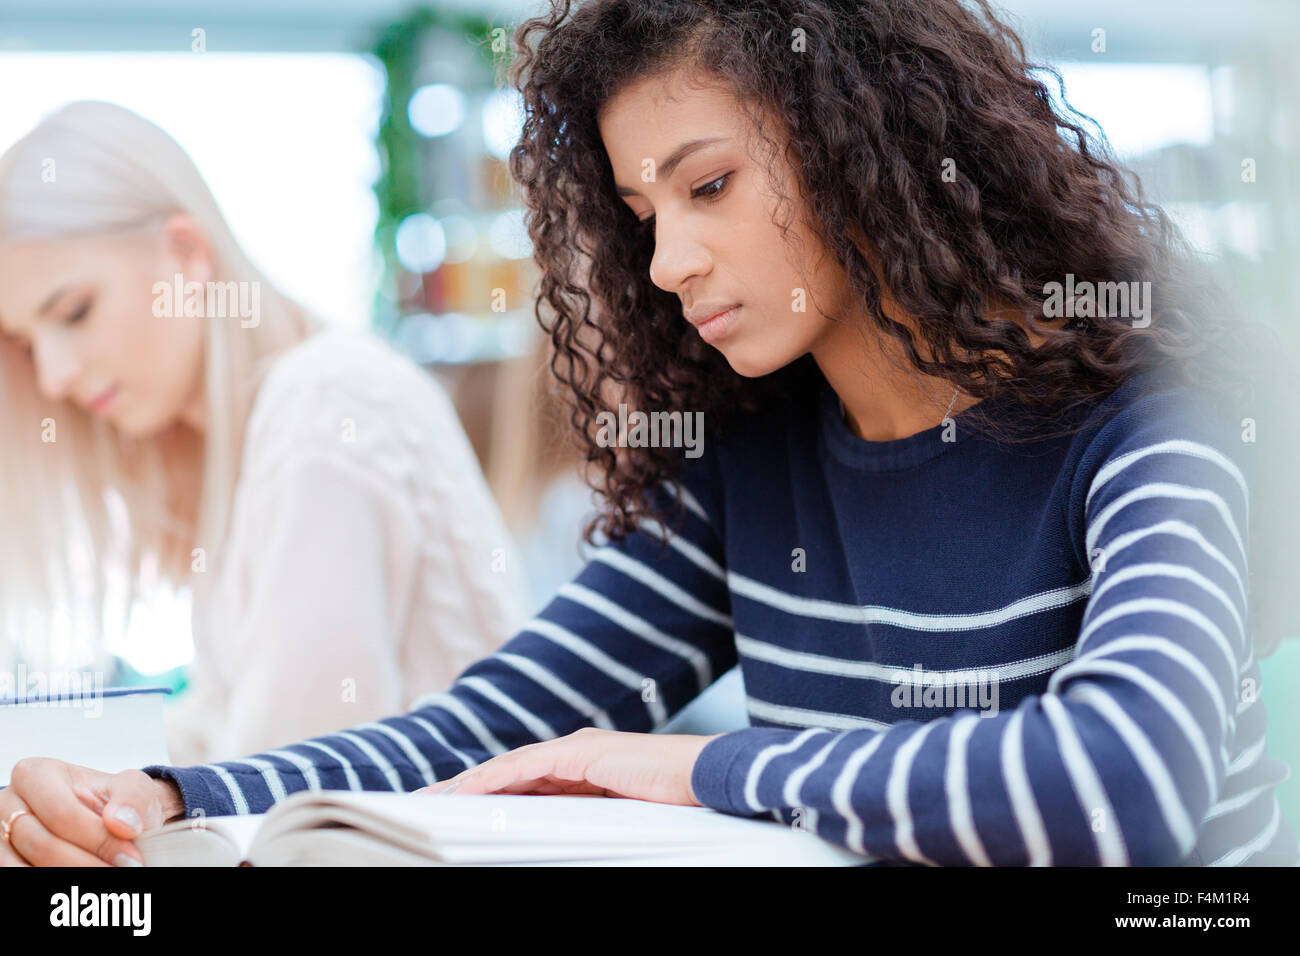 Afro american female student reading book in classroom with classmates on background Stock Photo